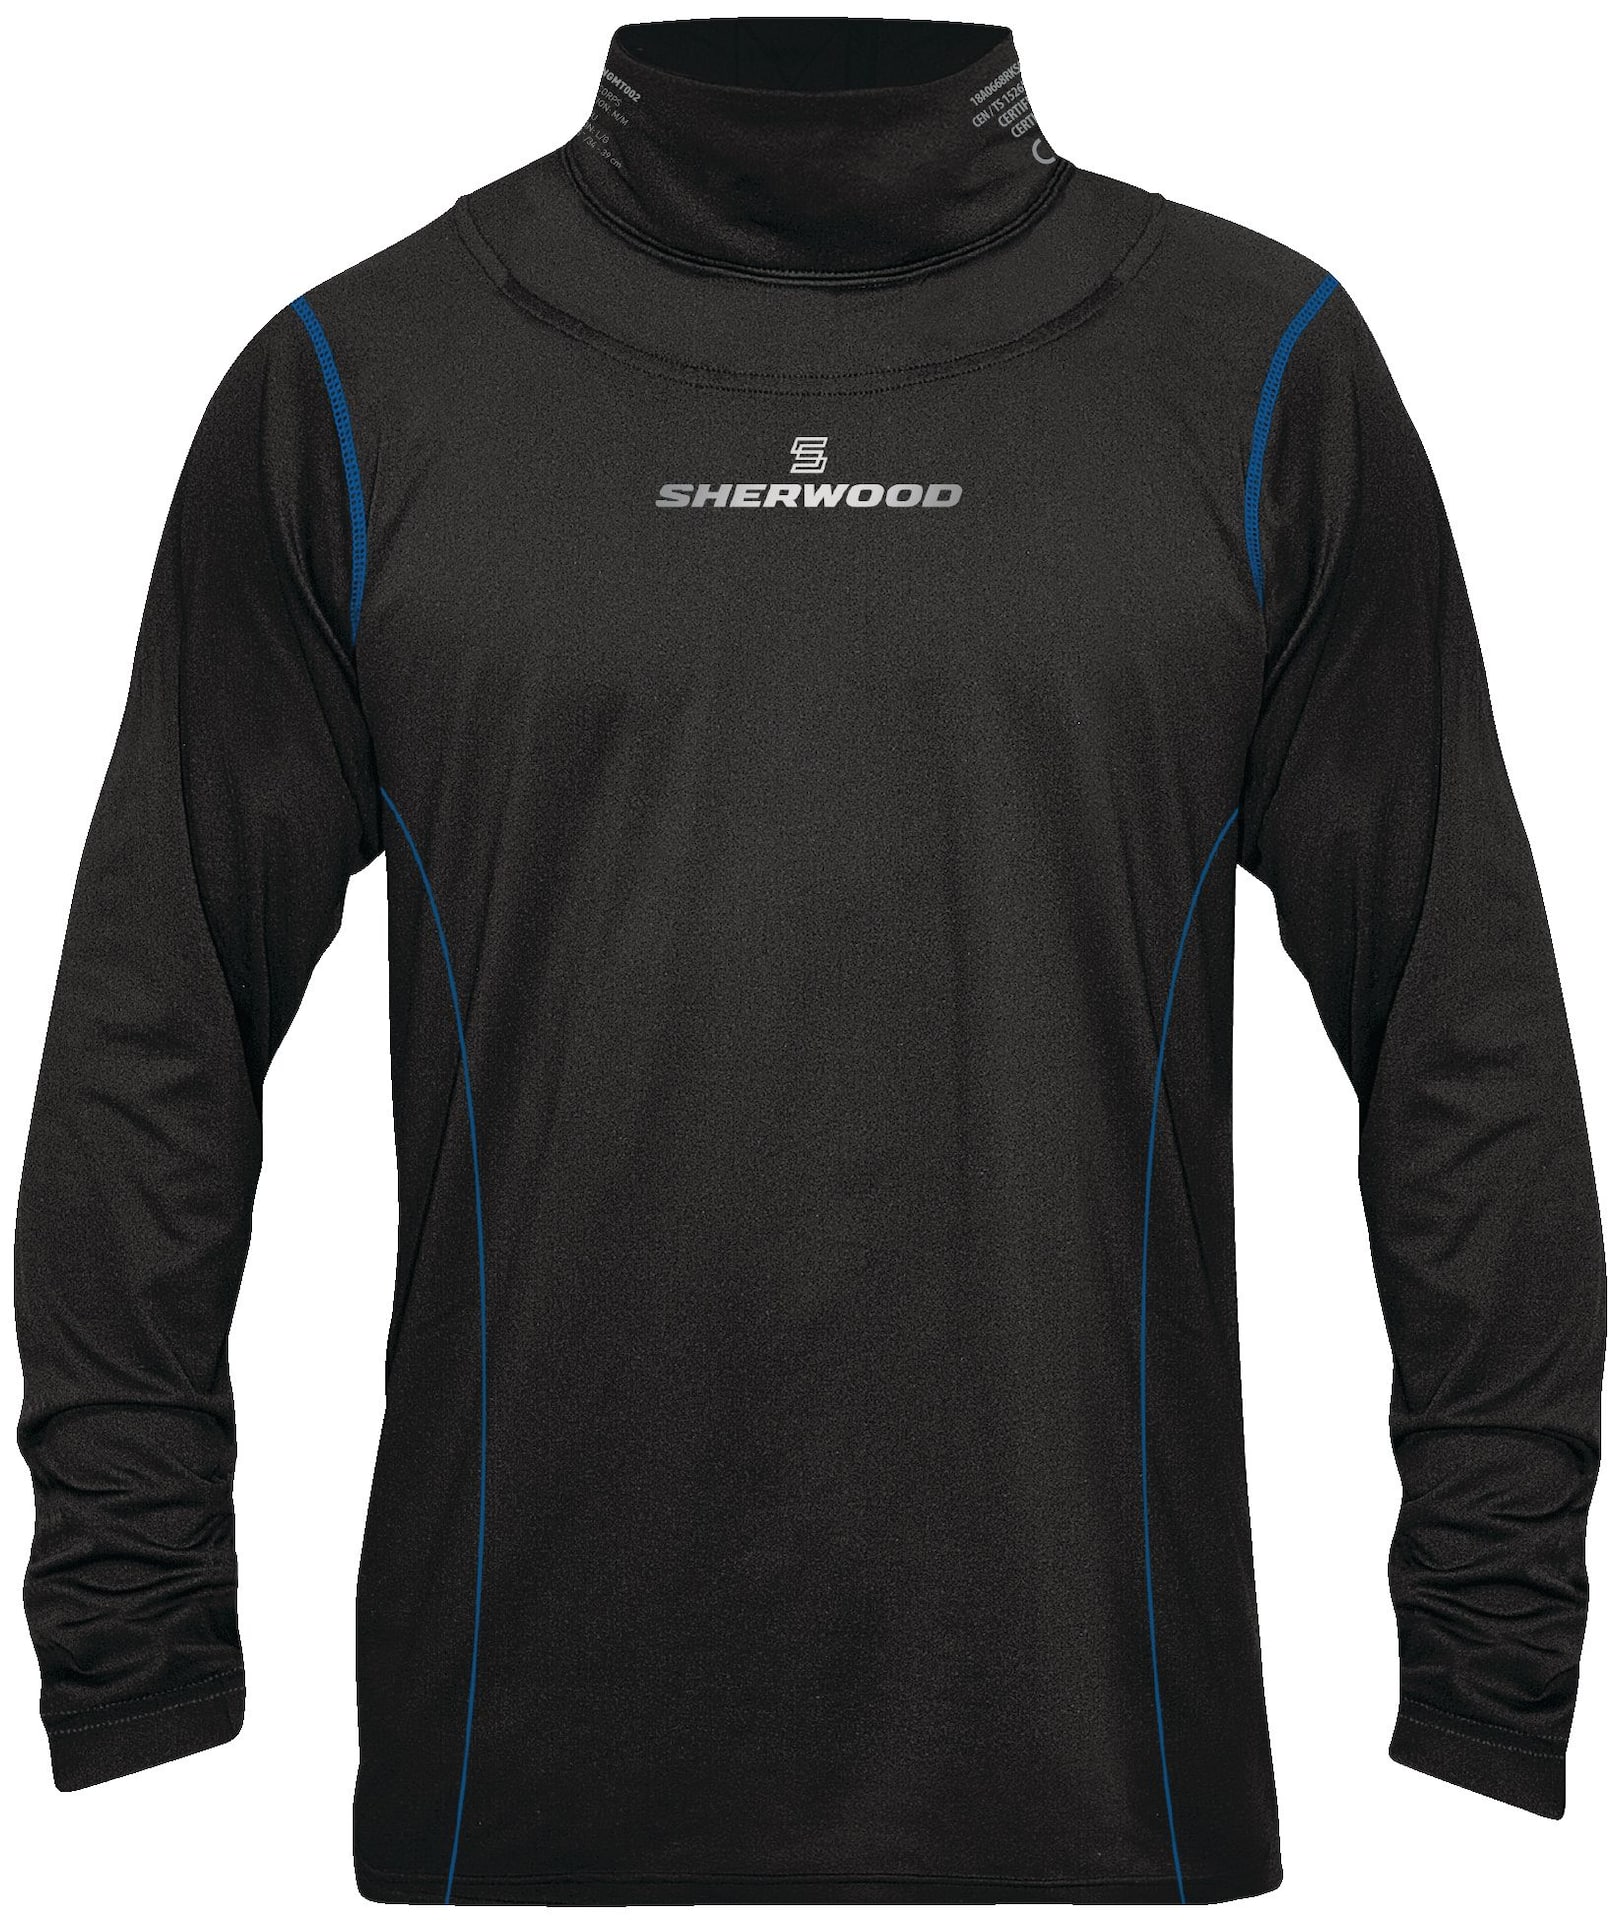 Sherwood Hockey Long Sleeve Top with Integrated Neck Guard, Senior/Men,  Black, Assorted Sizes